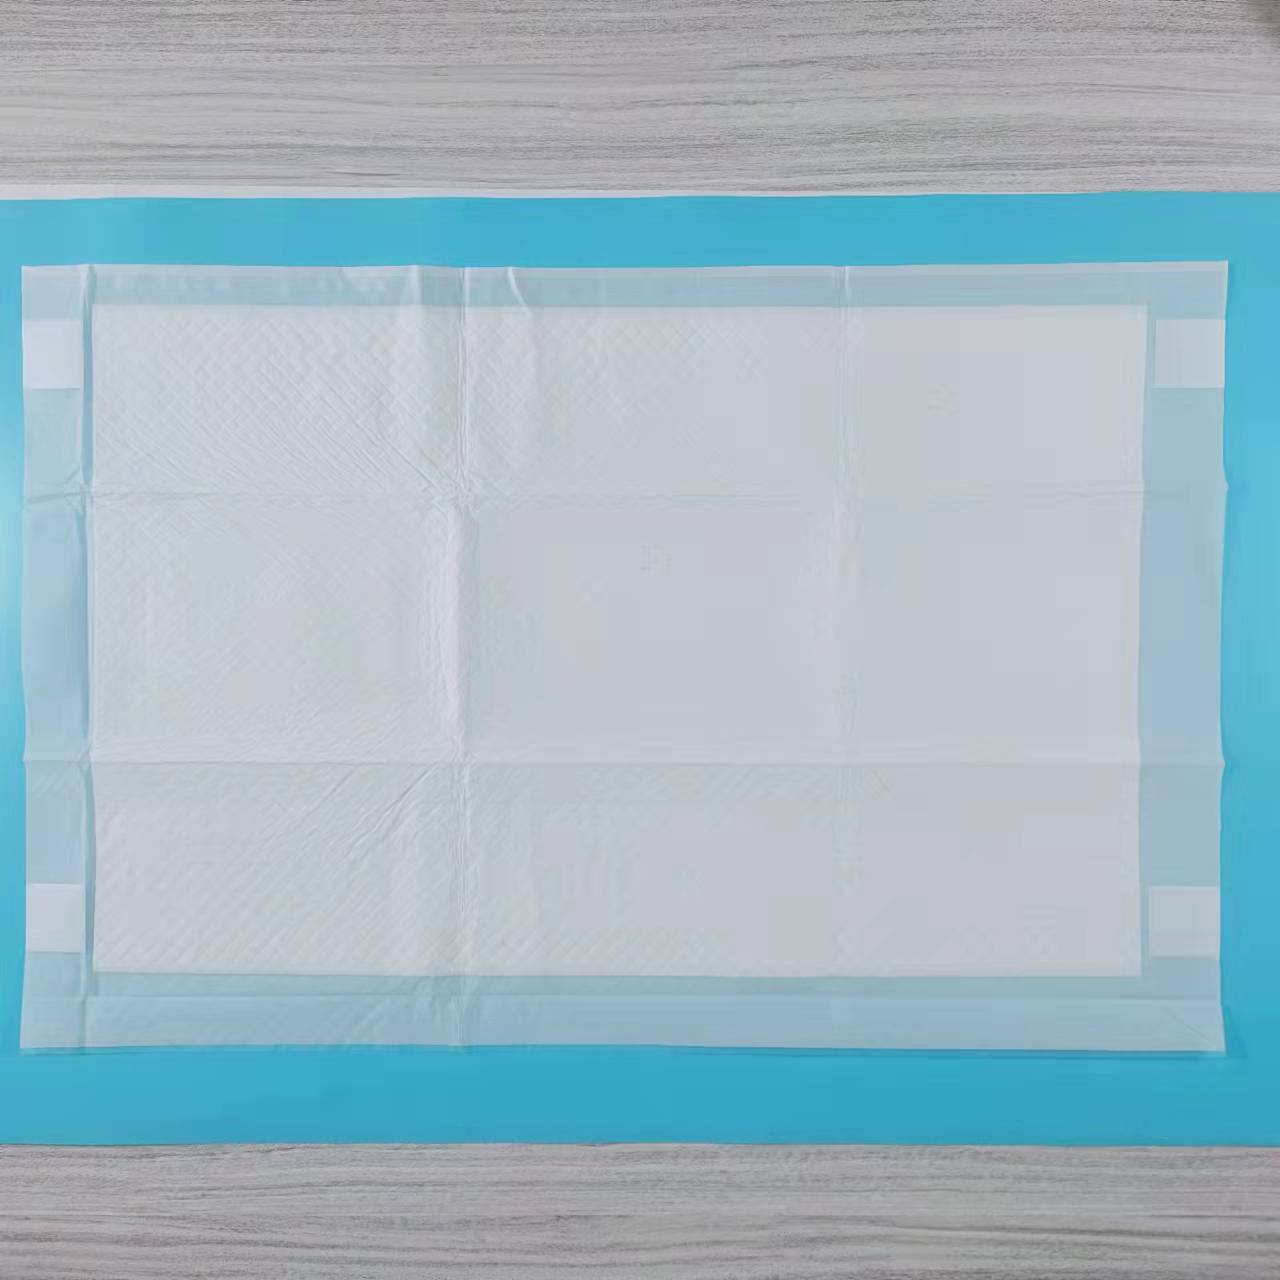 China factory super absorbency with four corner positioning pad disposable incontinence underpad